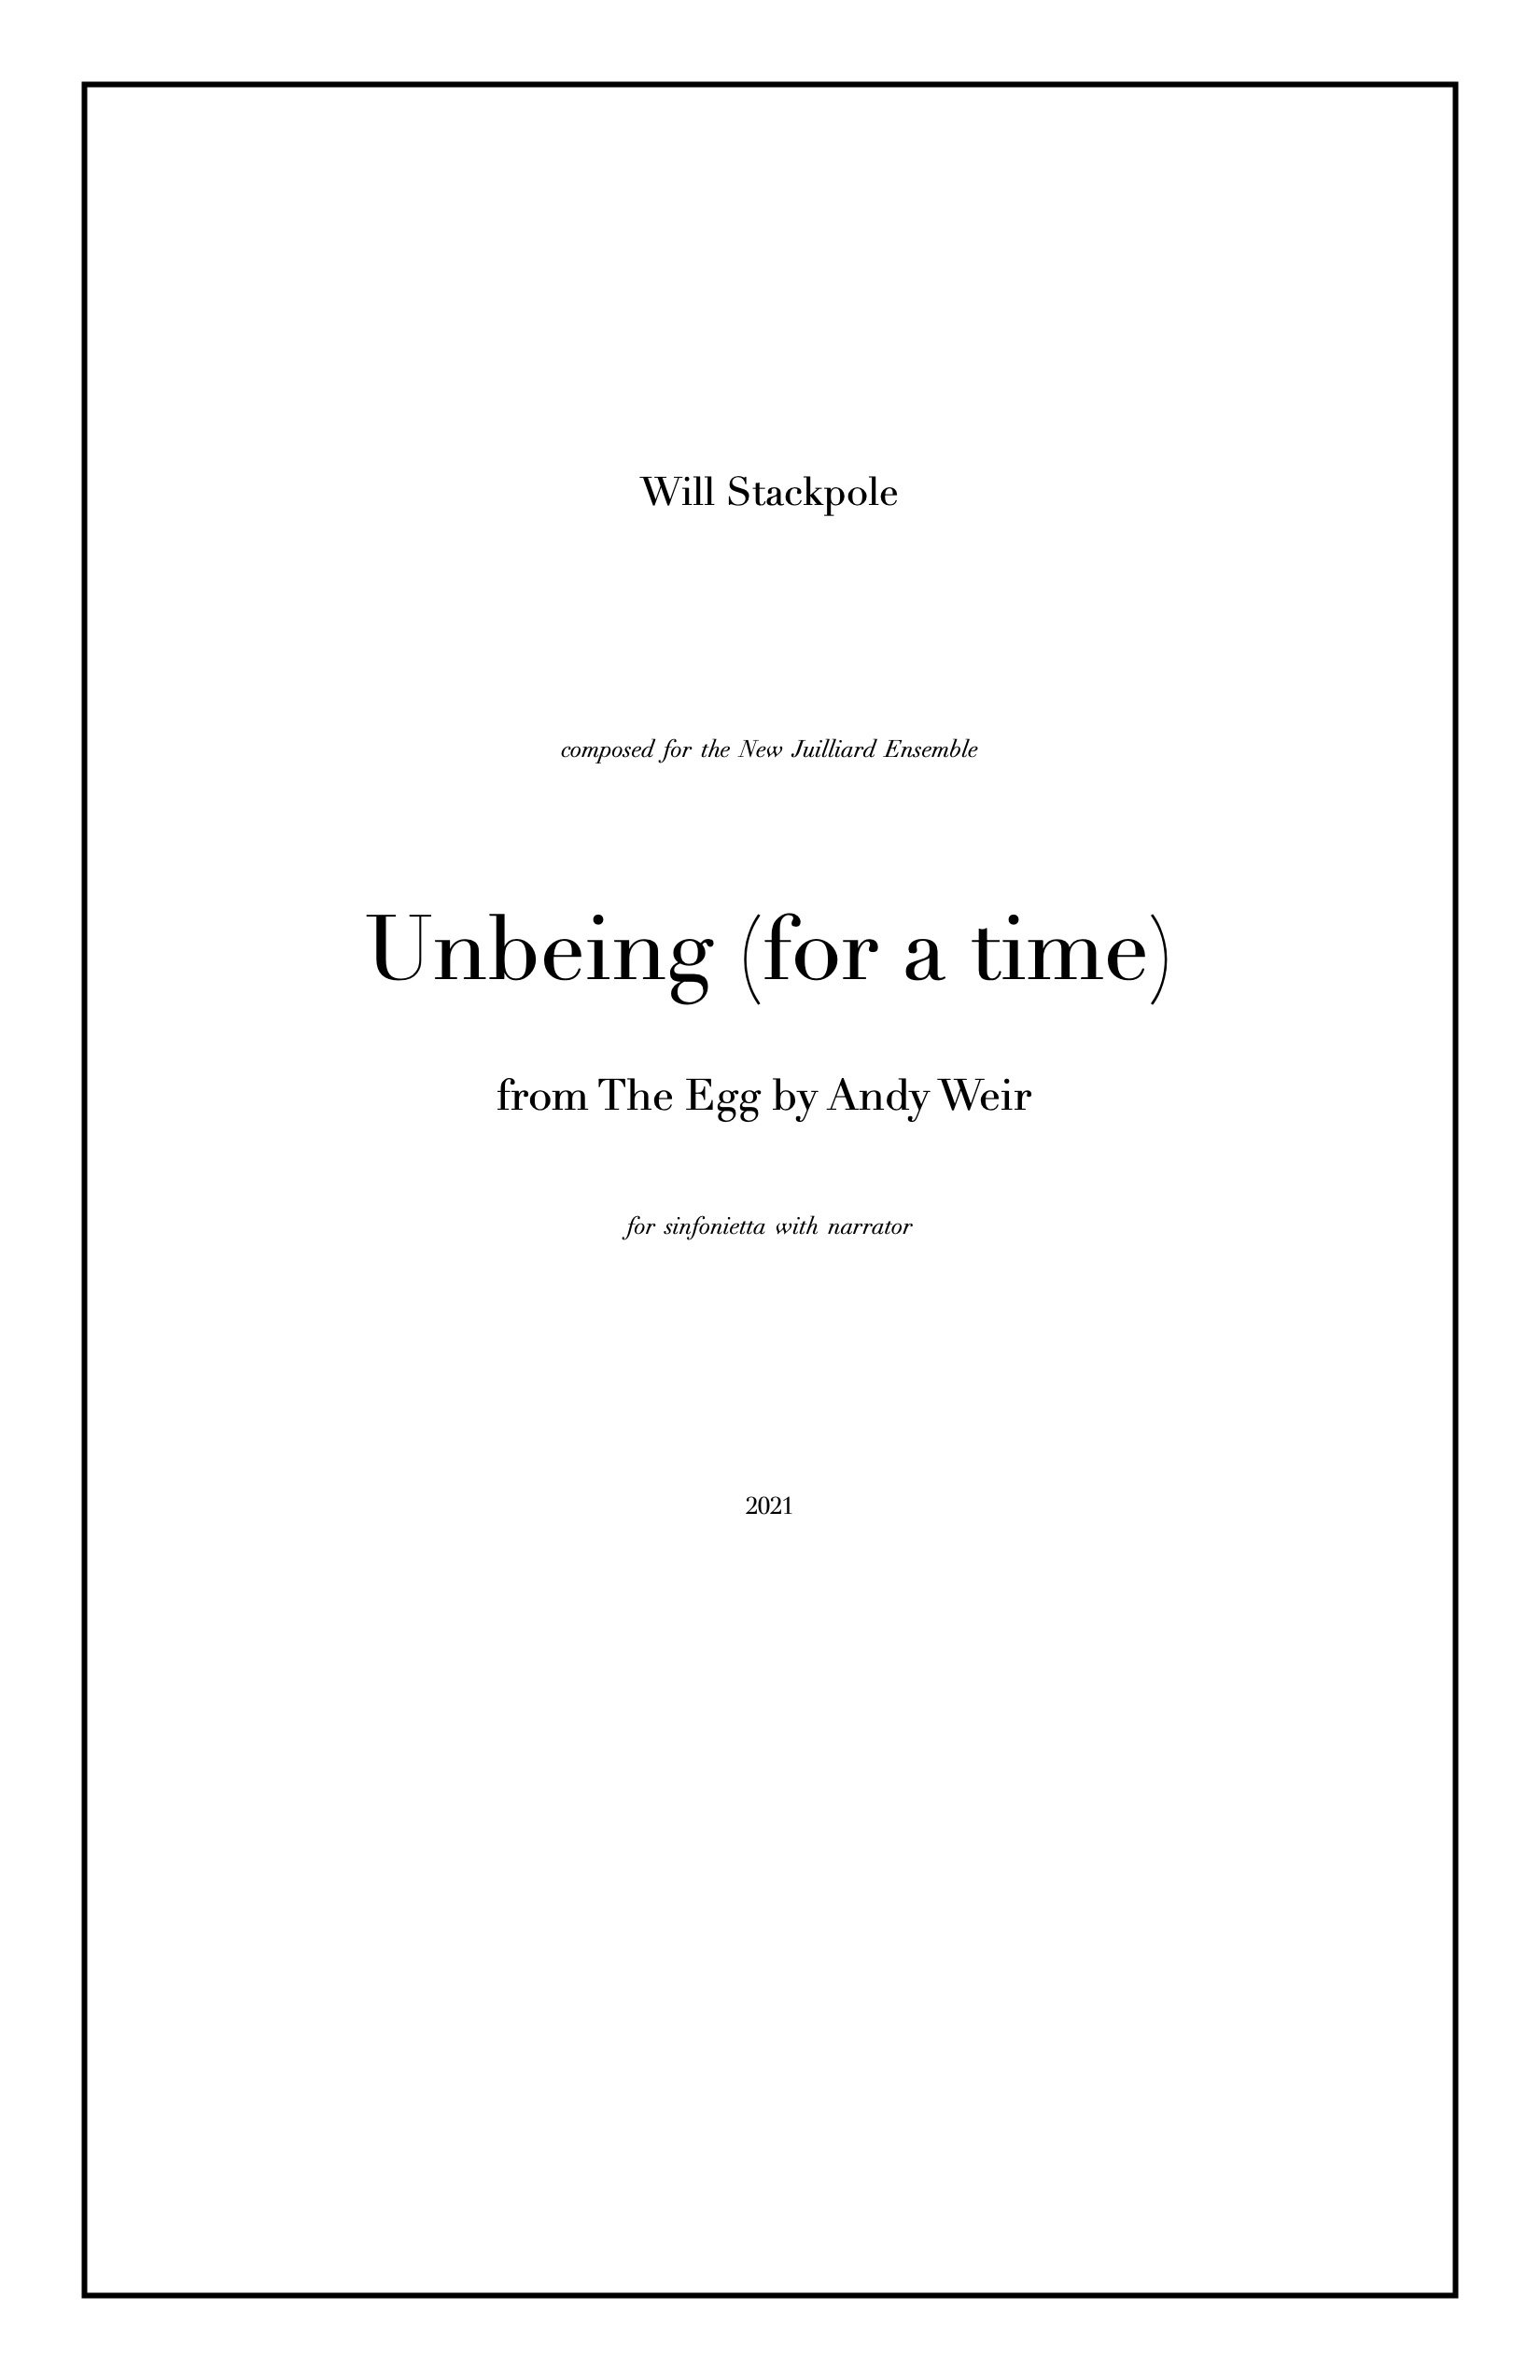 Unbeing (for a time)  - Will Stackpole 95.jpeg